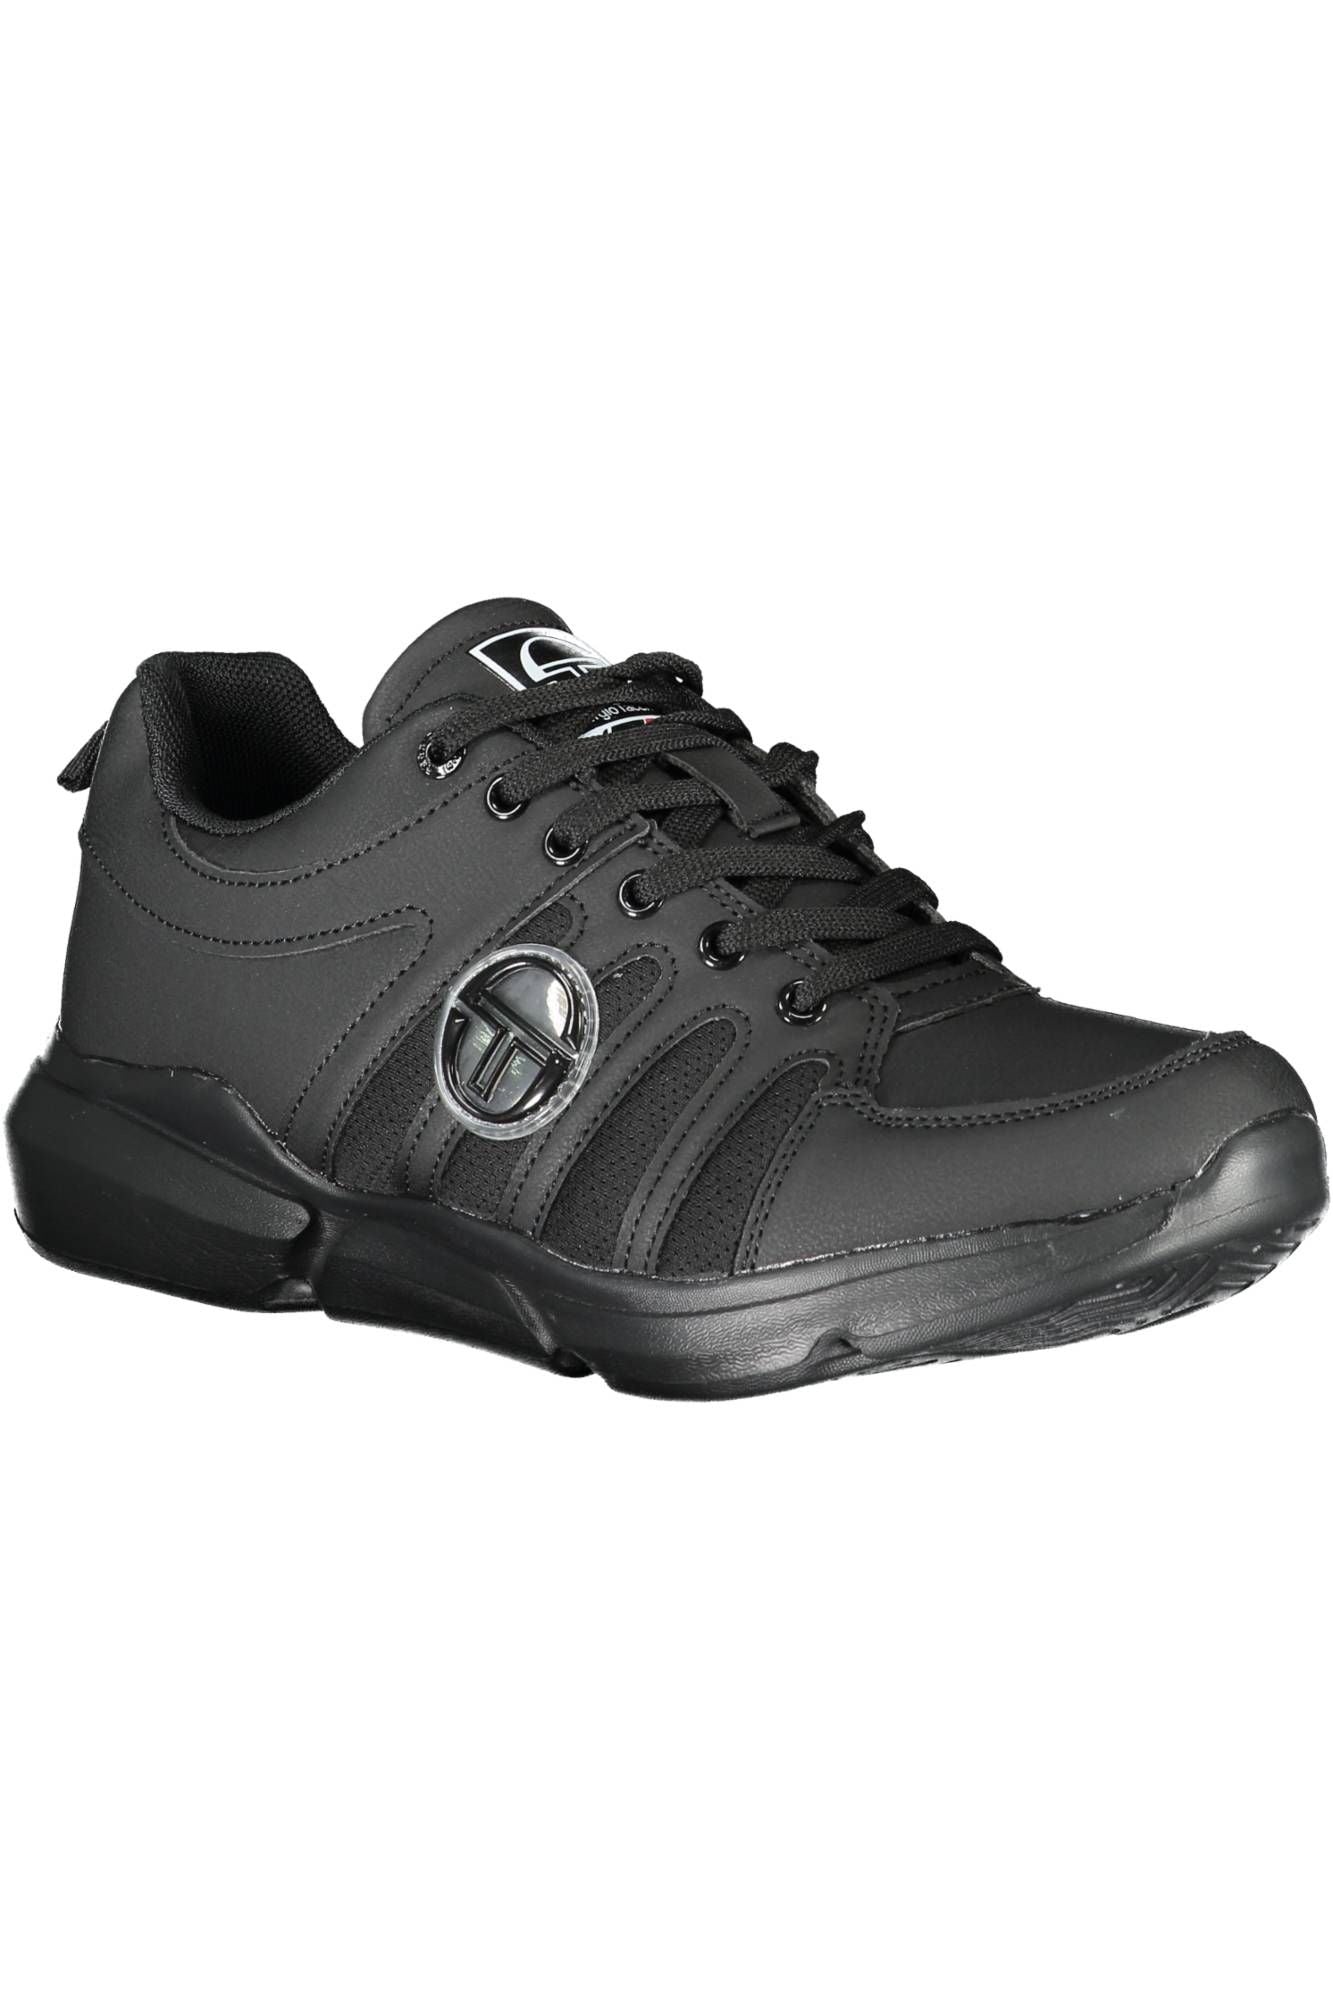 Sergio Tacchini Sleek Black Sports Sneakers with Contrasting Details